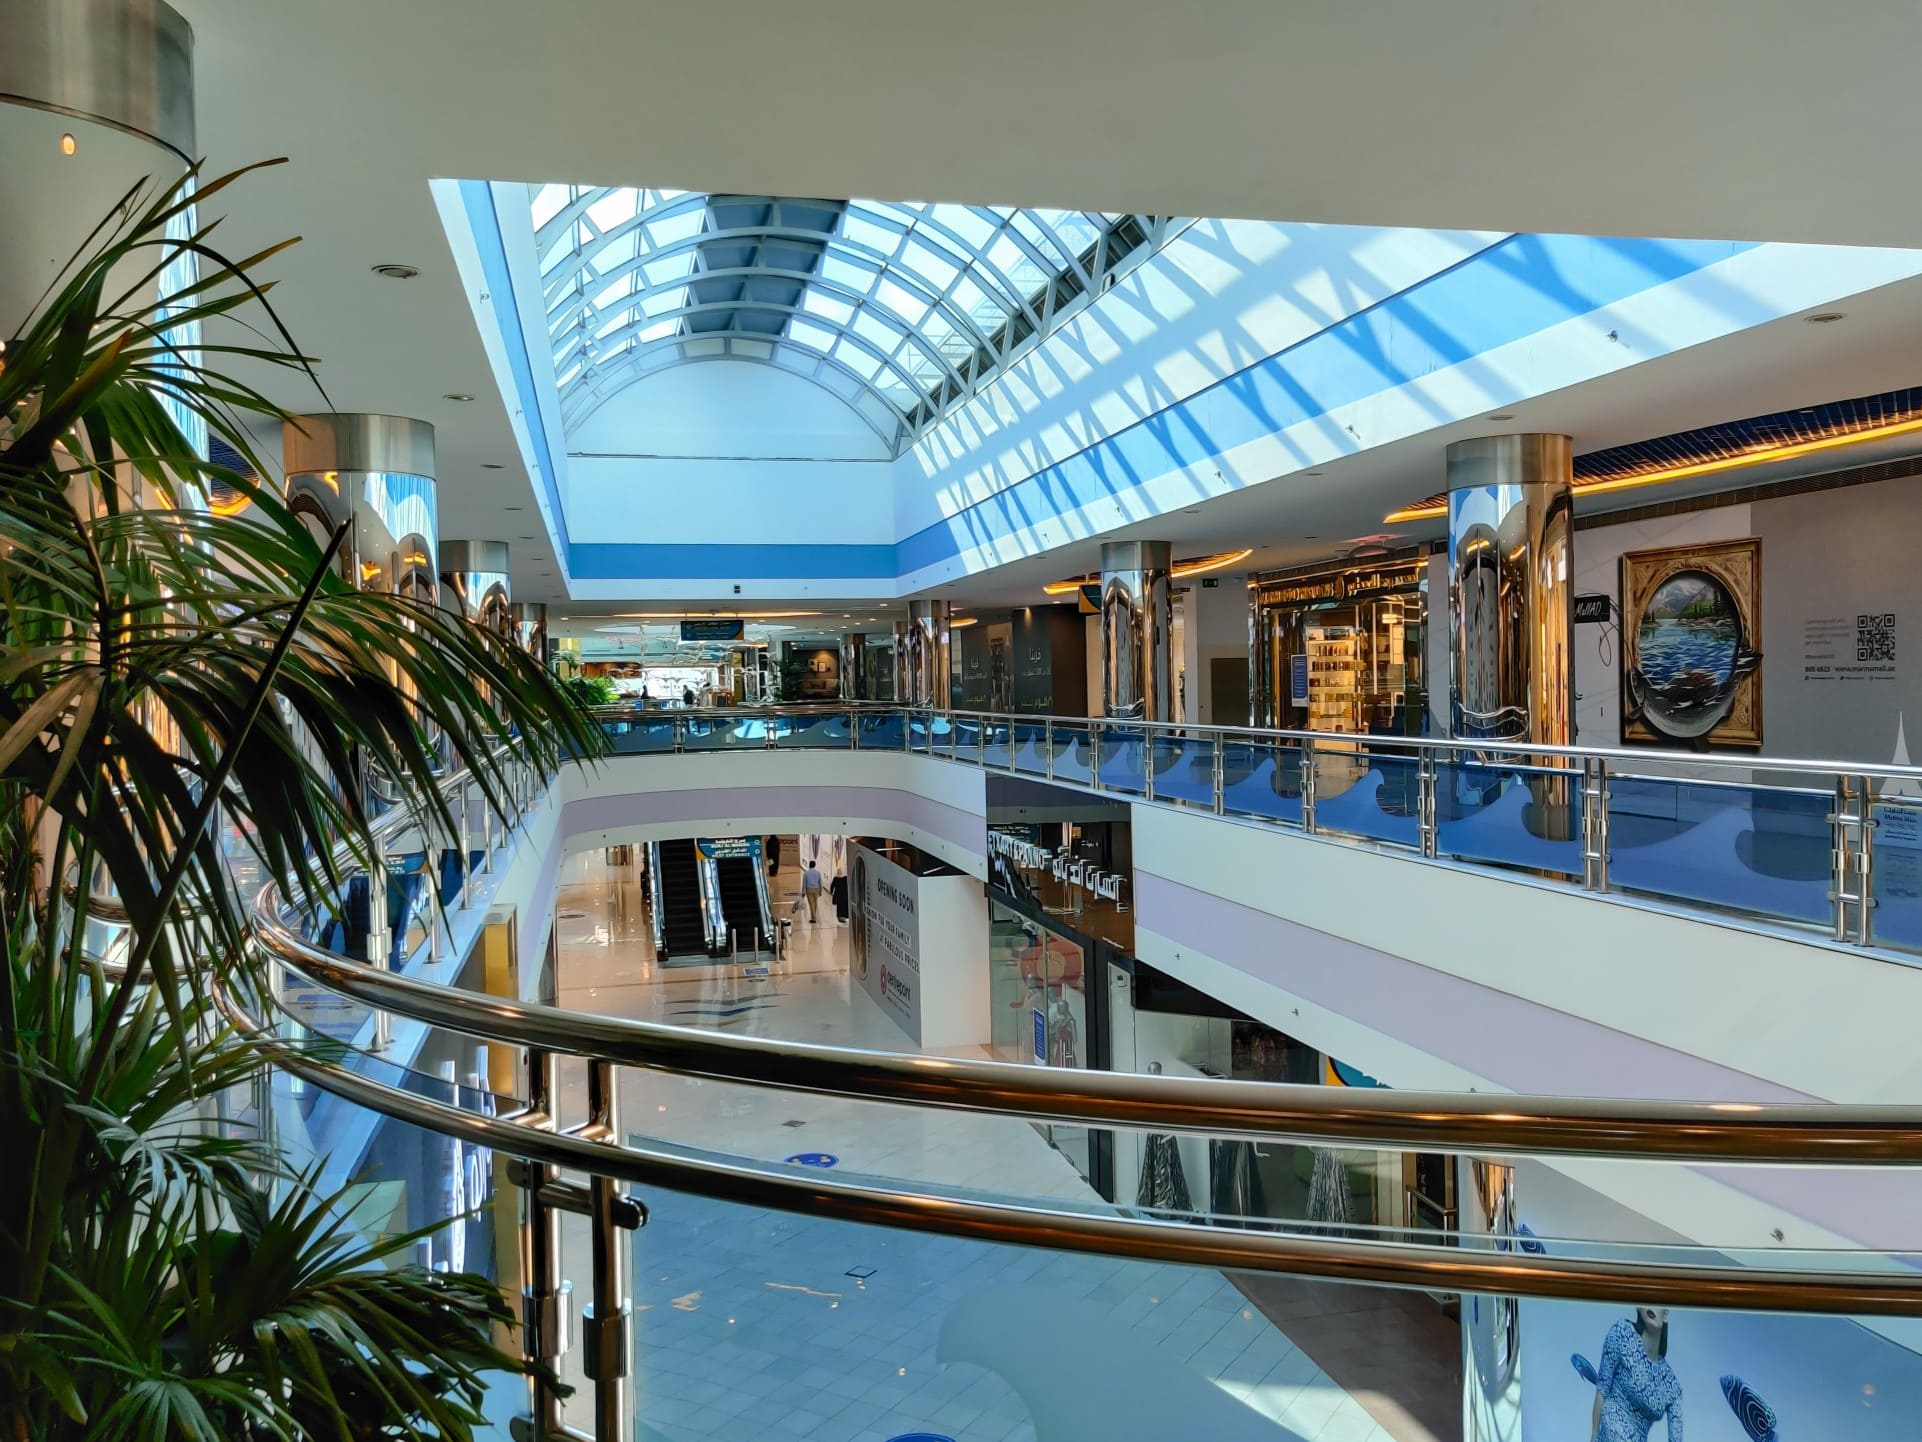 modern-mall-interior-with-natural-light-marina-mall-abu-dhabi-a-famous-attraction-in-the-uae_t20_b6J1ym(1)